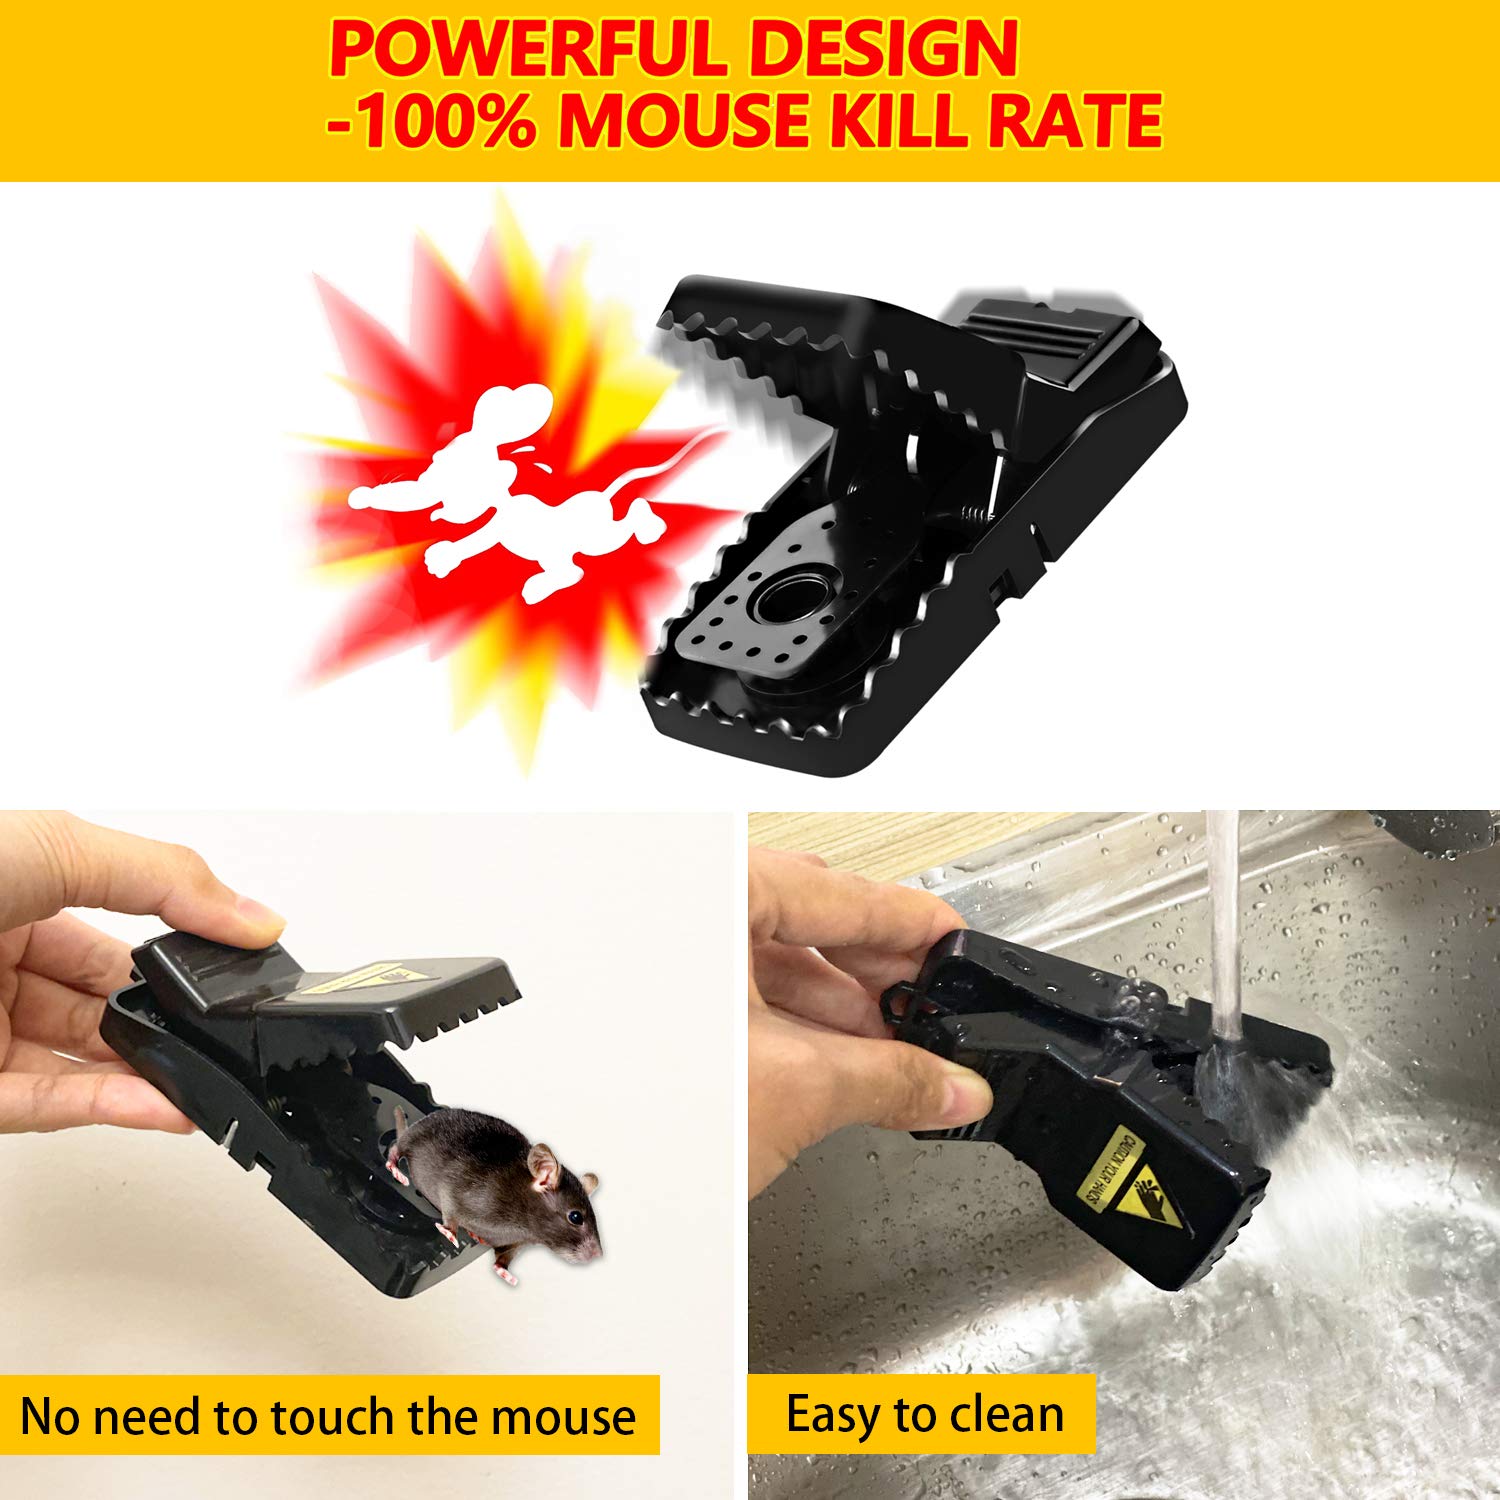 Mouse Traps,Small Mice Traps That Work, Humane Mouse Traps with Detachable Bait Cup, Mouse Catcher Quick Effective - 6 Pack